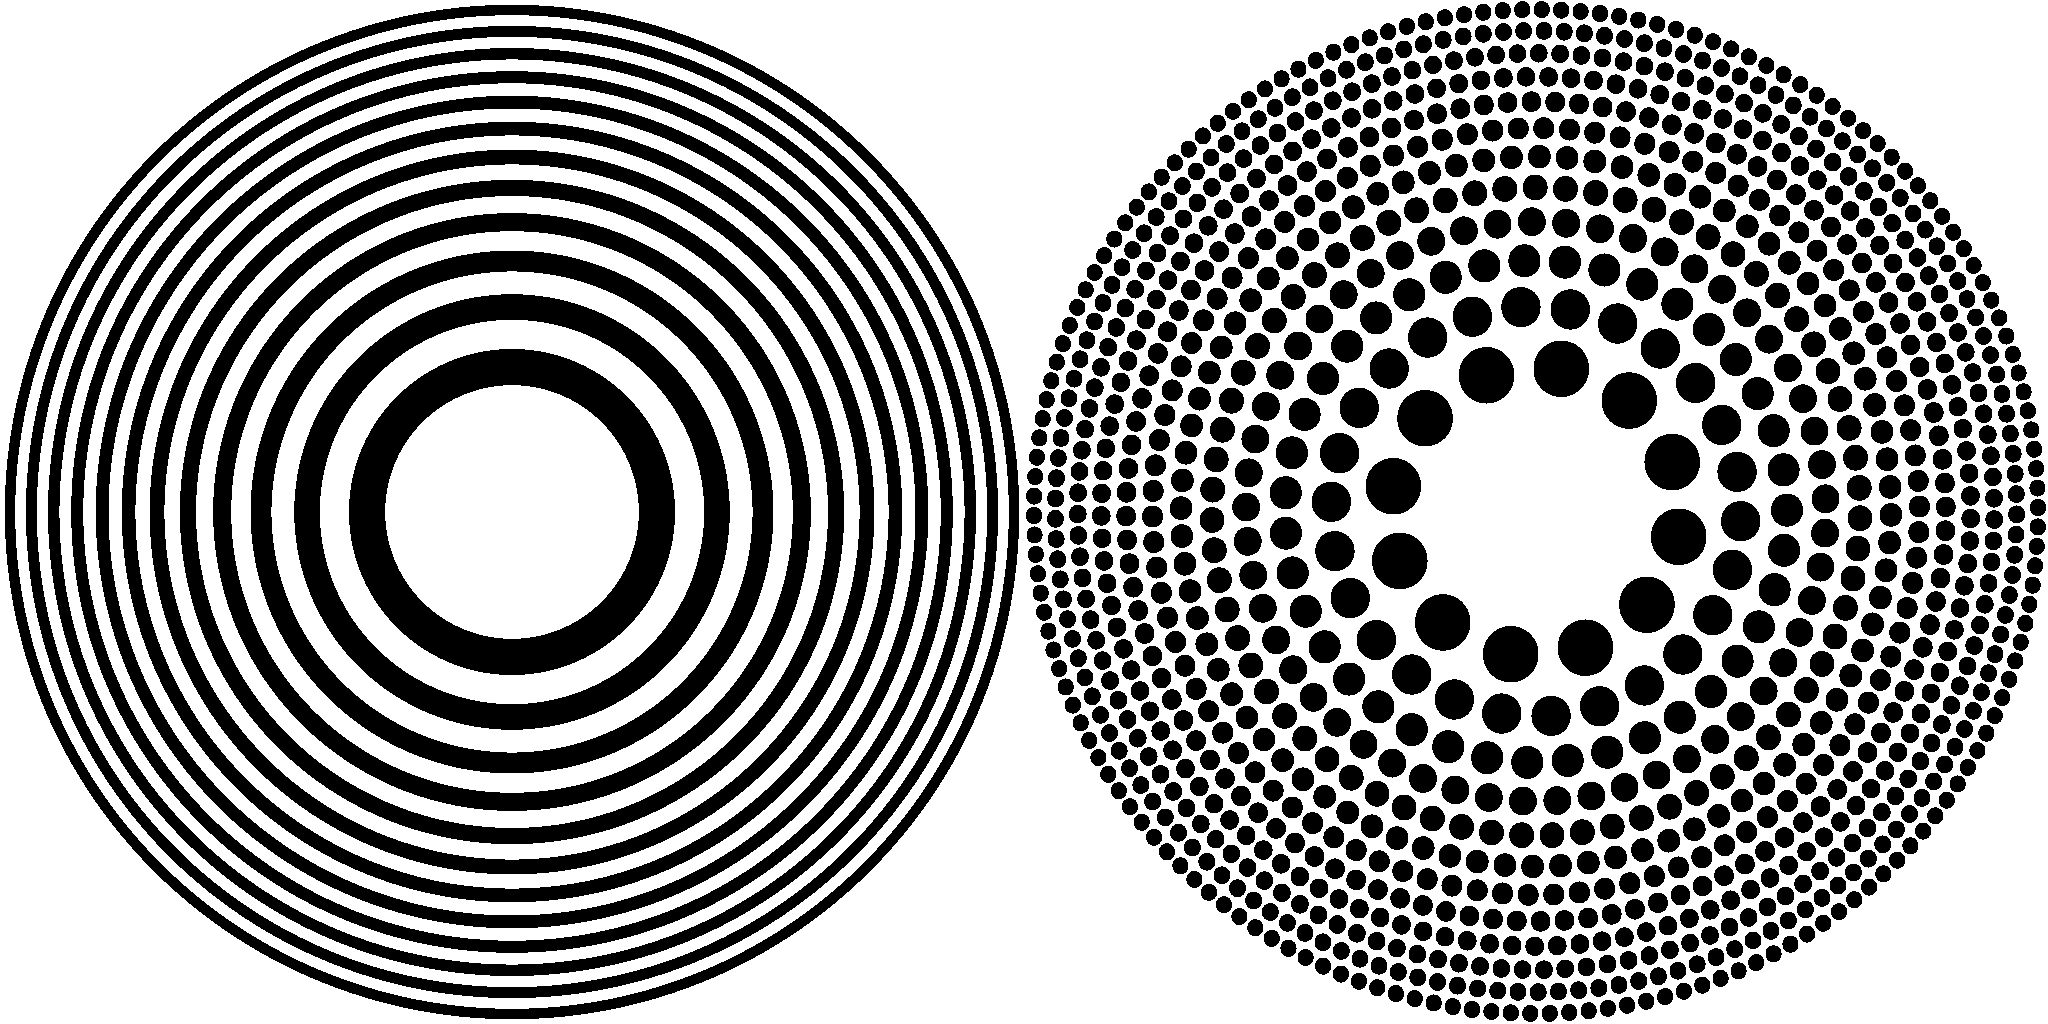 Two circles next to each other. The first is made of several black concentric circles. The second is made of dots of shrinking size forming concentric circles. 